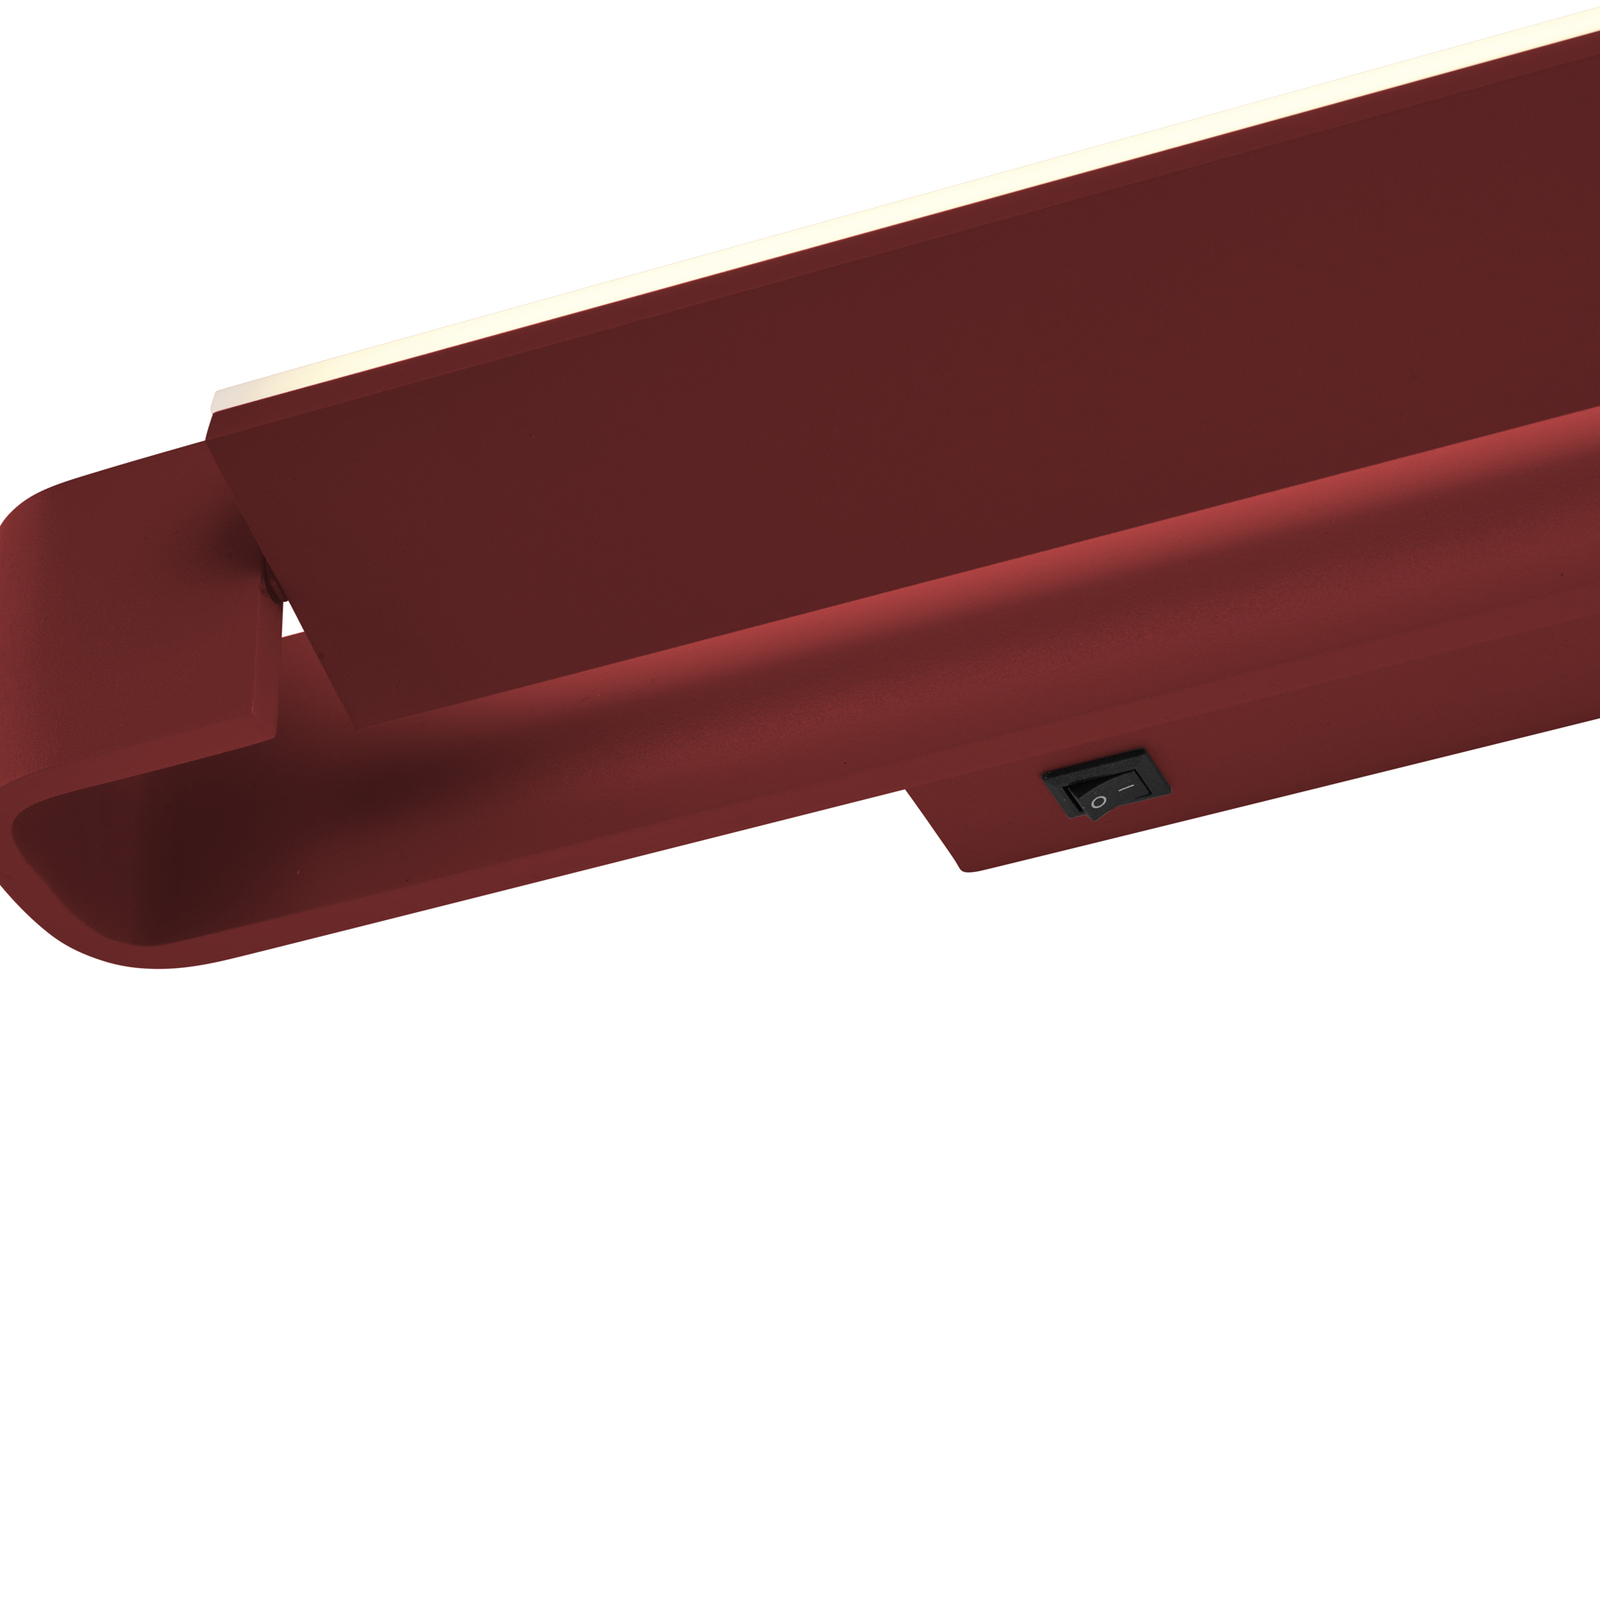 Box LED wall light, rotatable, India red